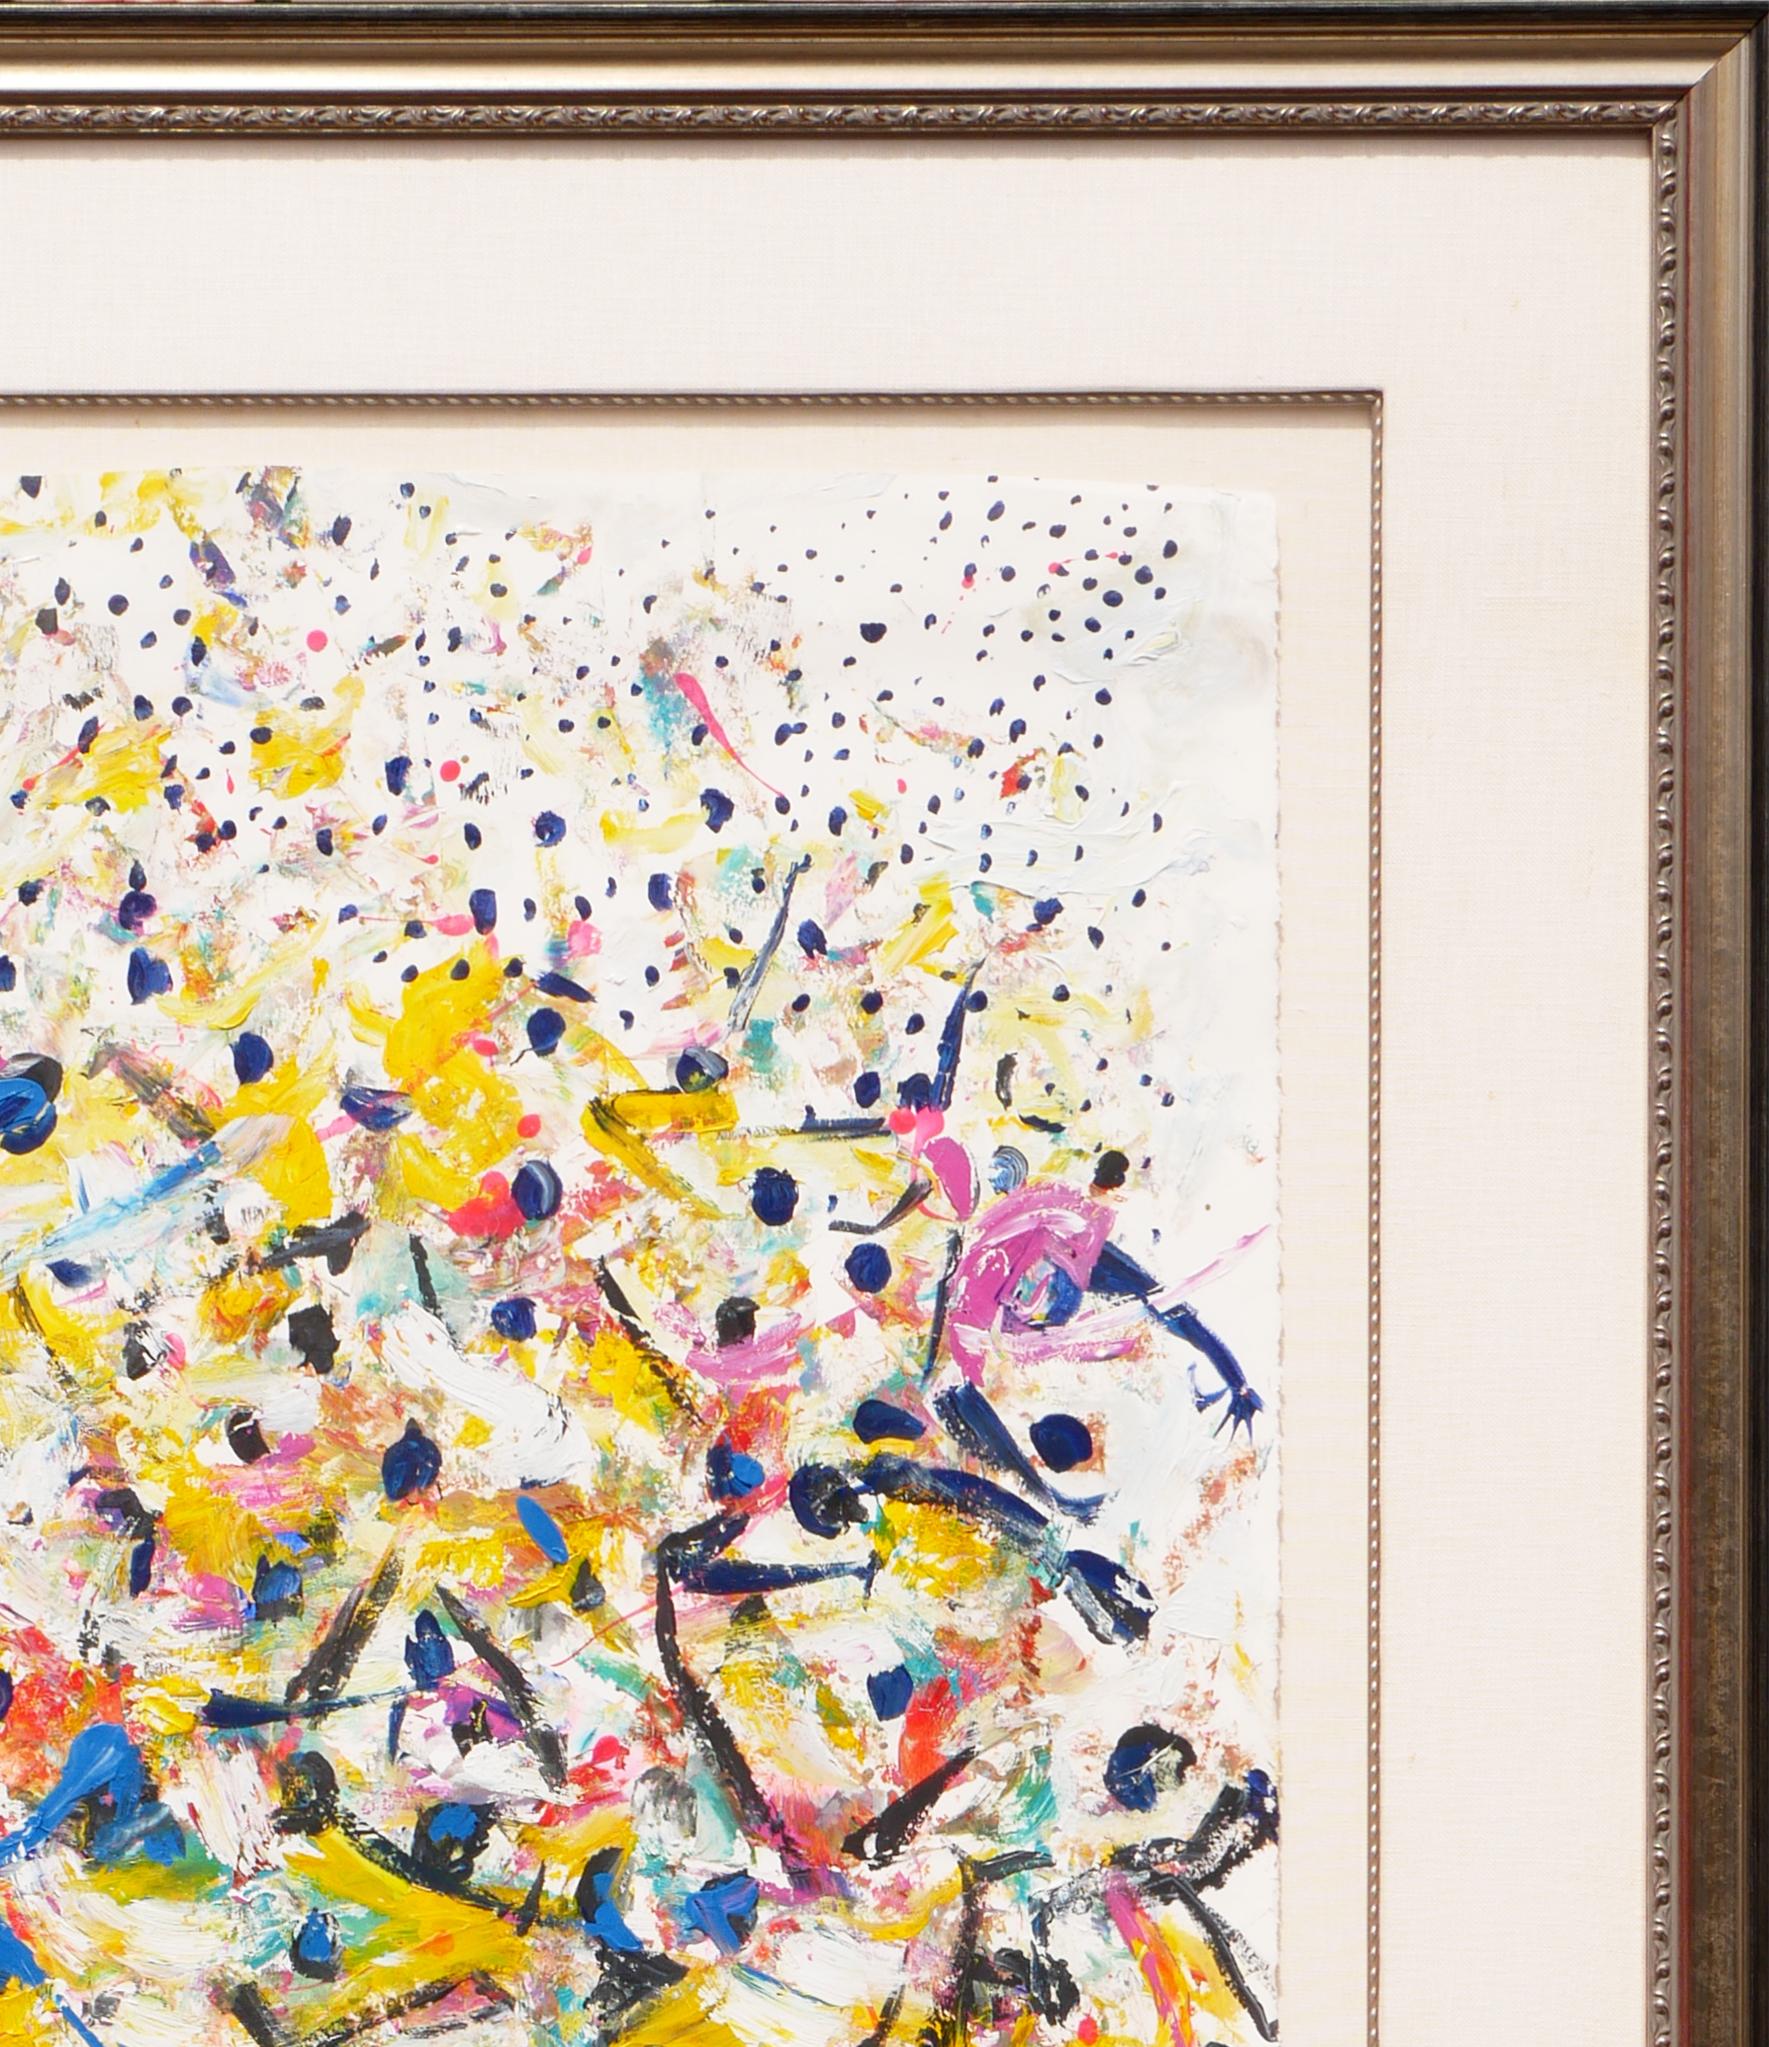 Colorful abstract expressionist figurative painting by Brazilian artist, Ernani Silva. This painting on archival paper depicts a crowd of people dancing on what seems to be an ice skating rink. Signed by the artist in front lower left corner.